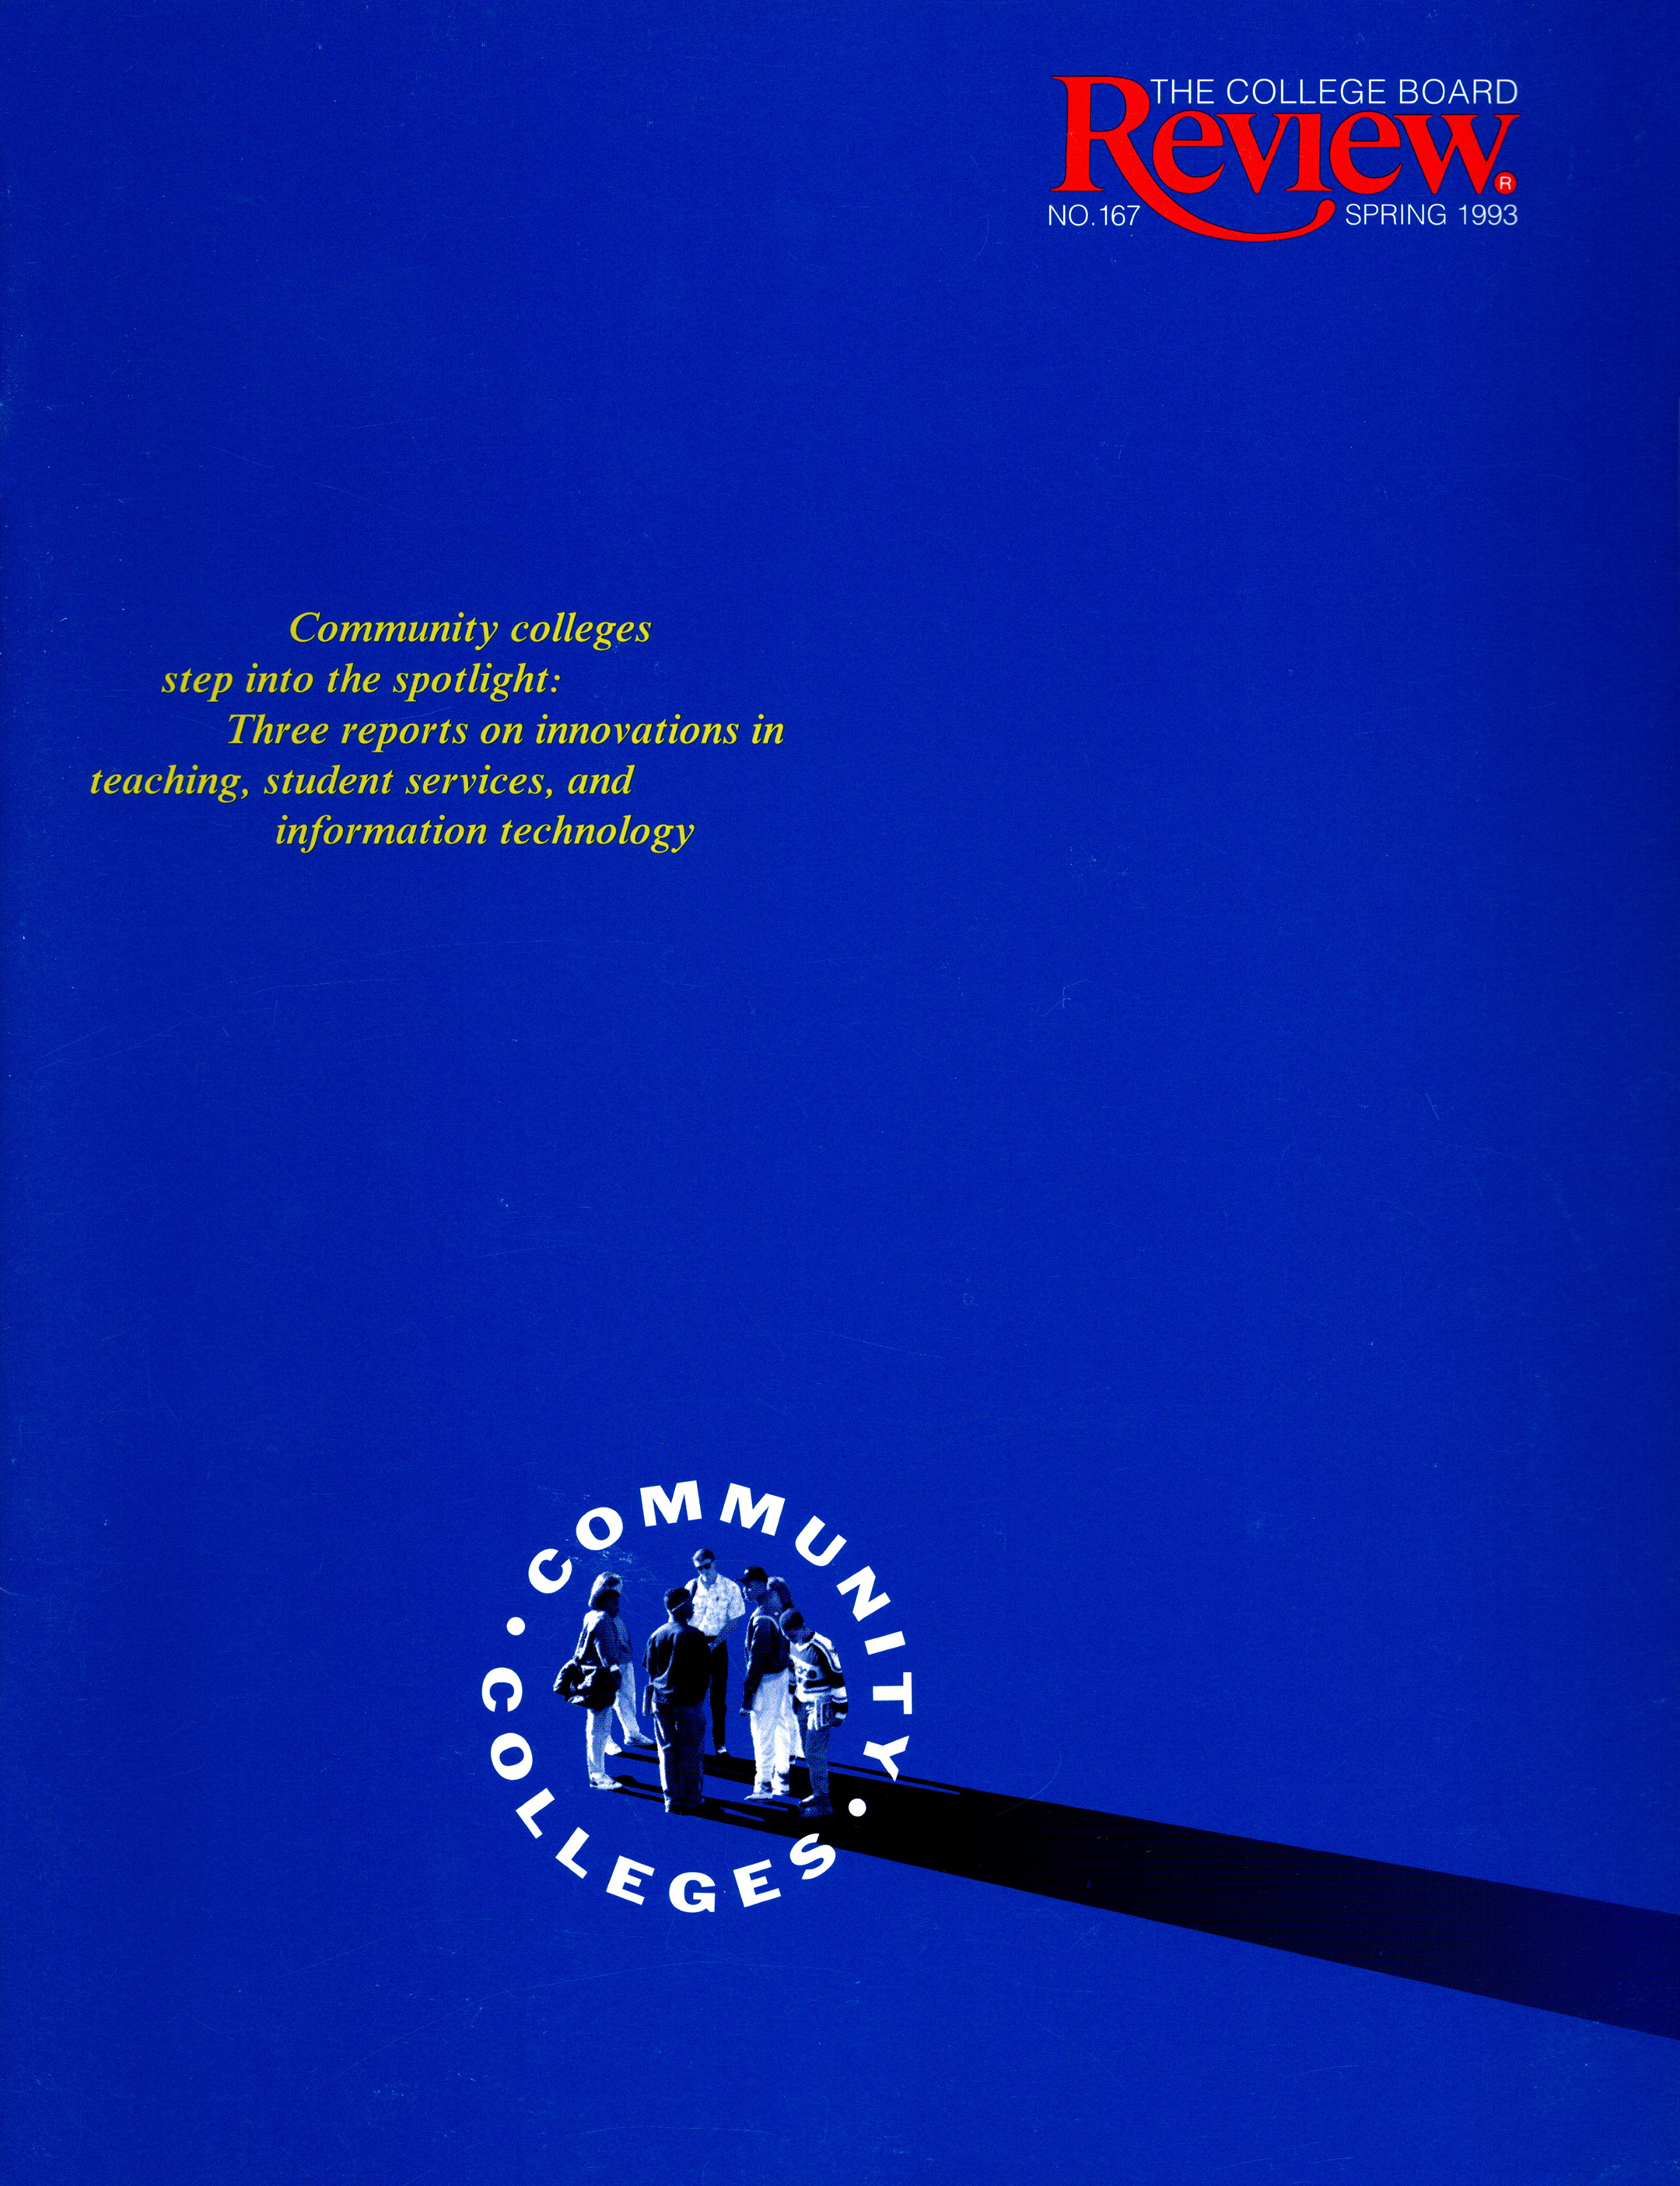 Cover of the Spring 1993 issue of the College Board Review magazine